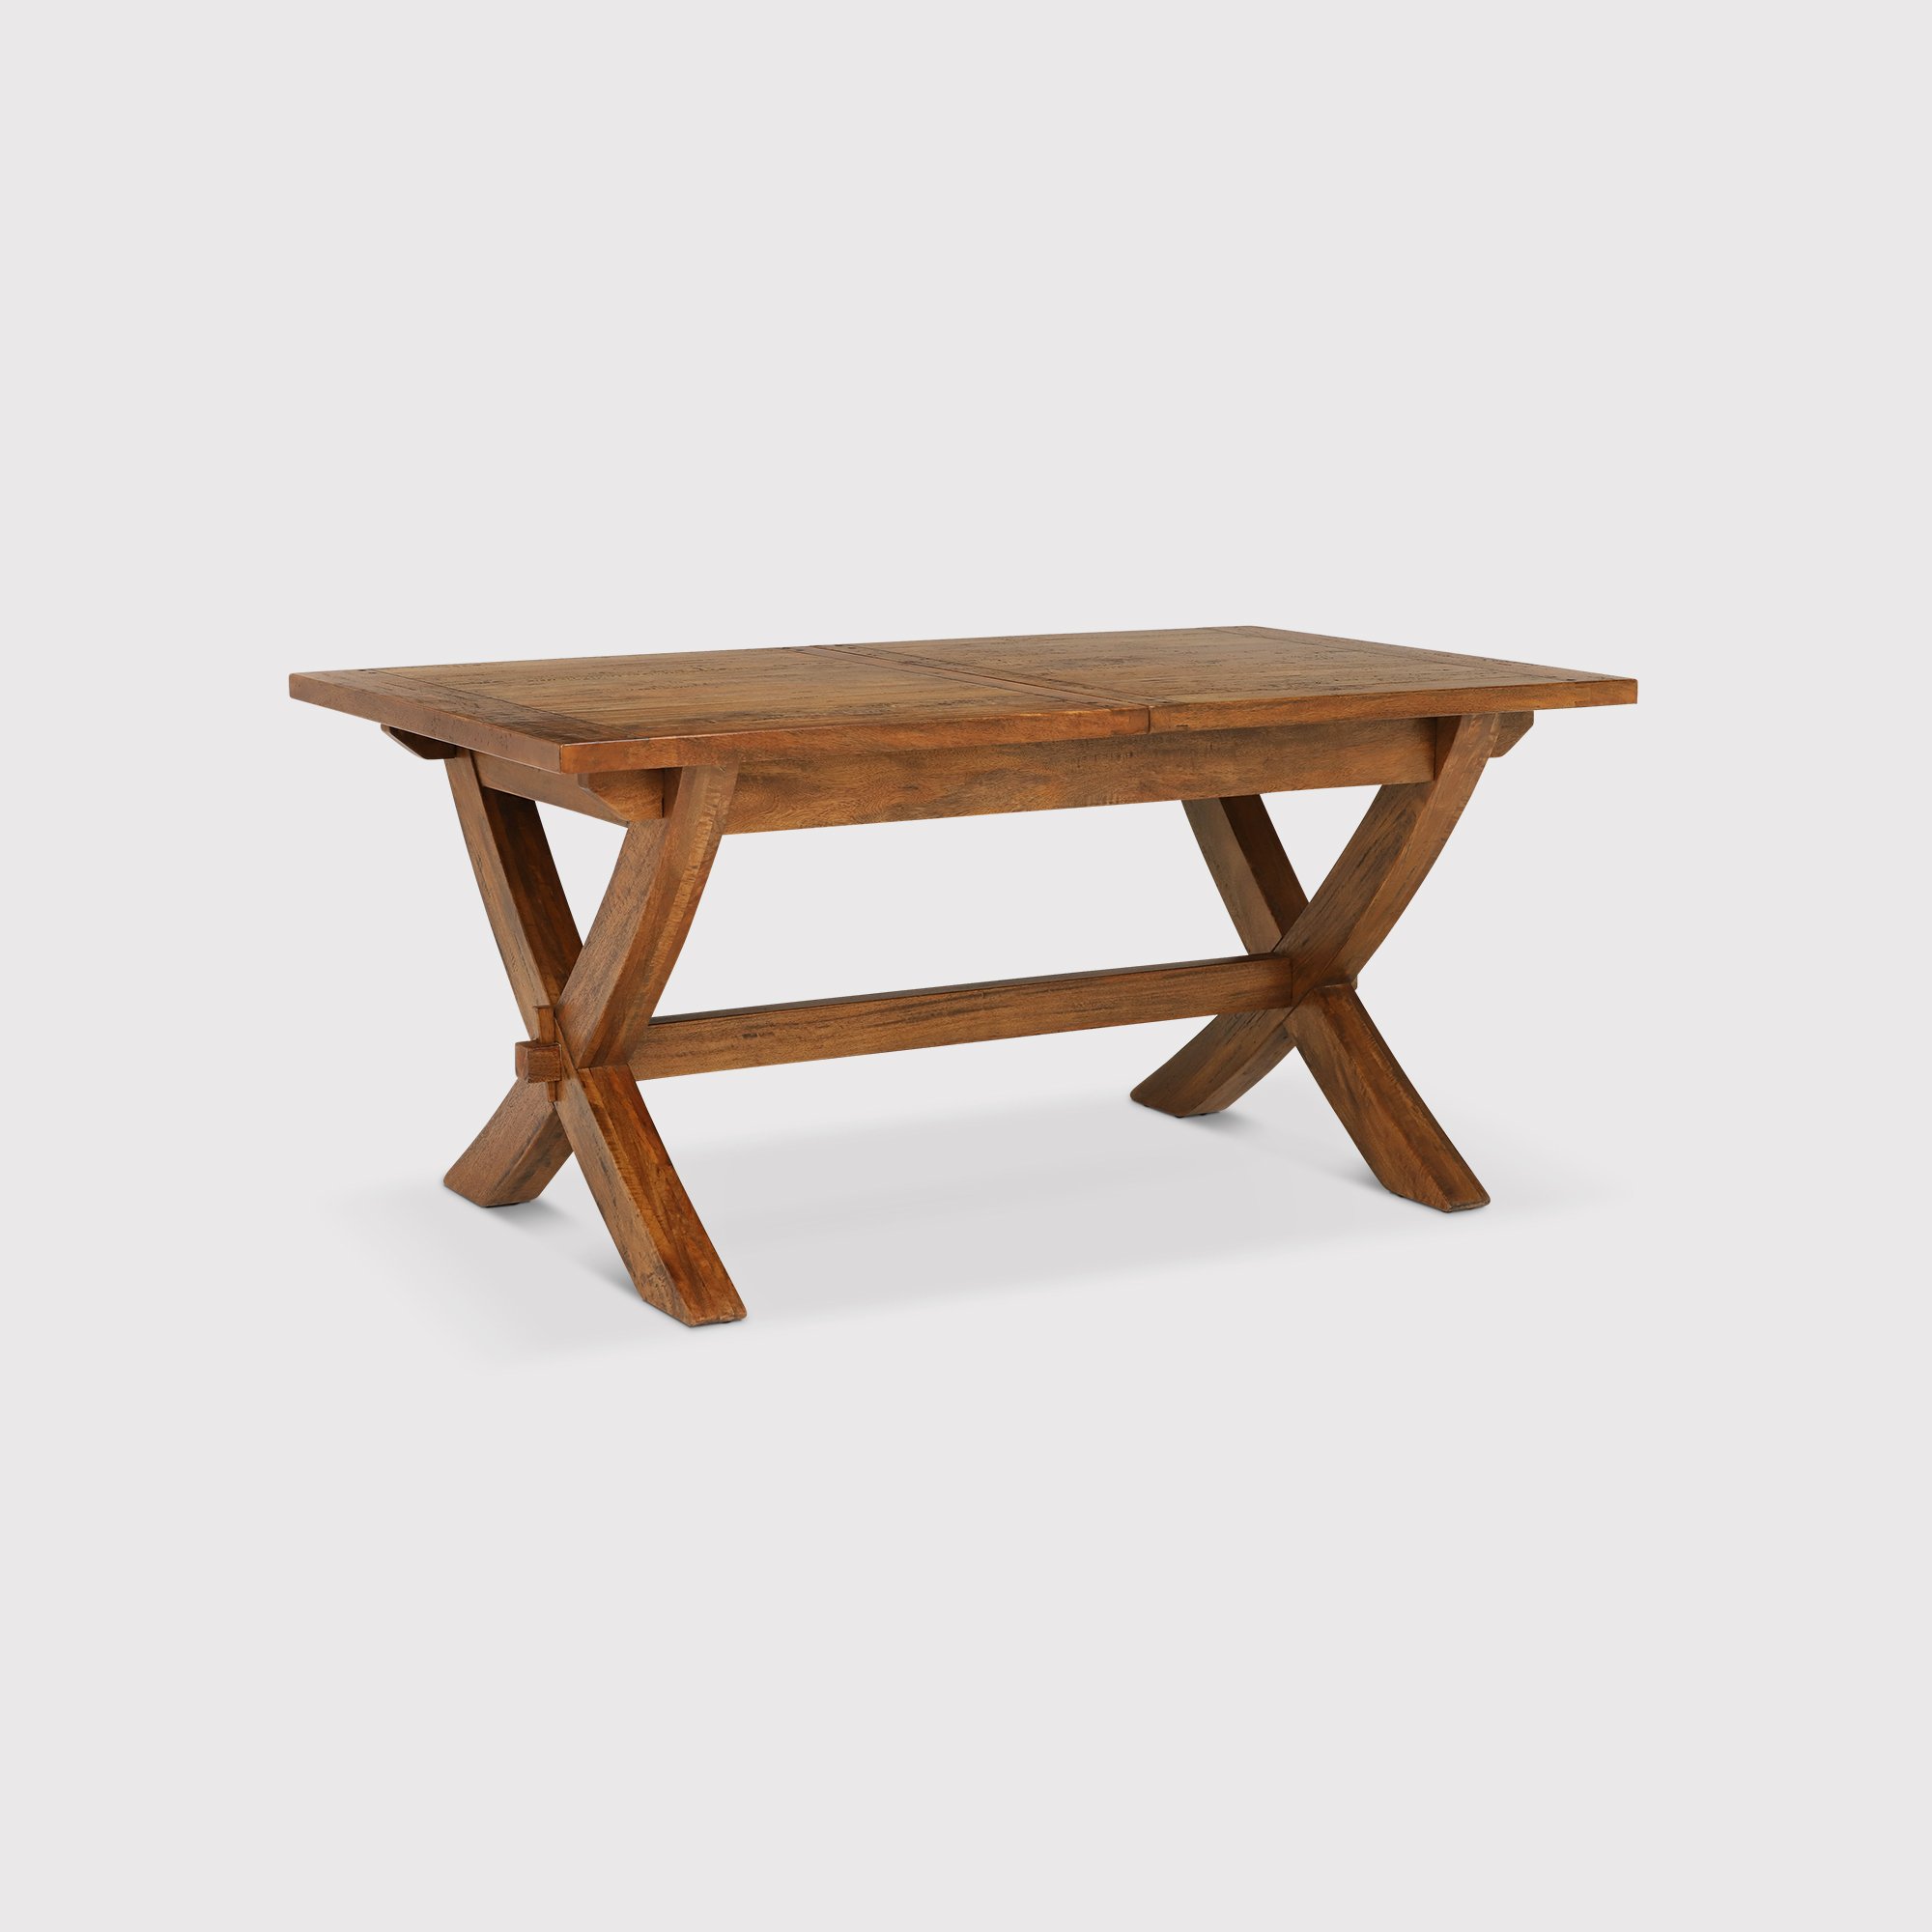 New Frontier X Leg Extending Dining Table, Brown | Barker & Stonehouse